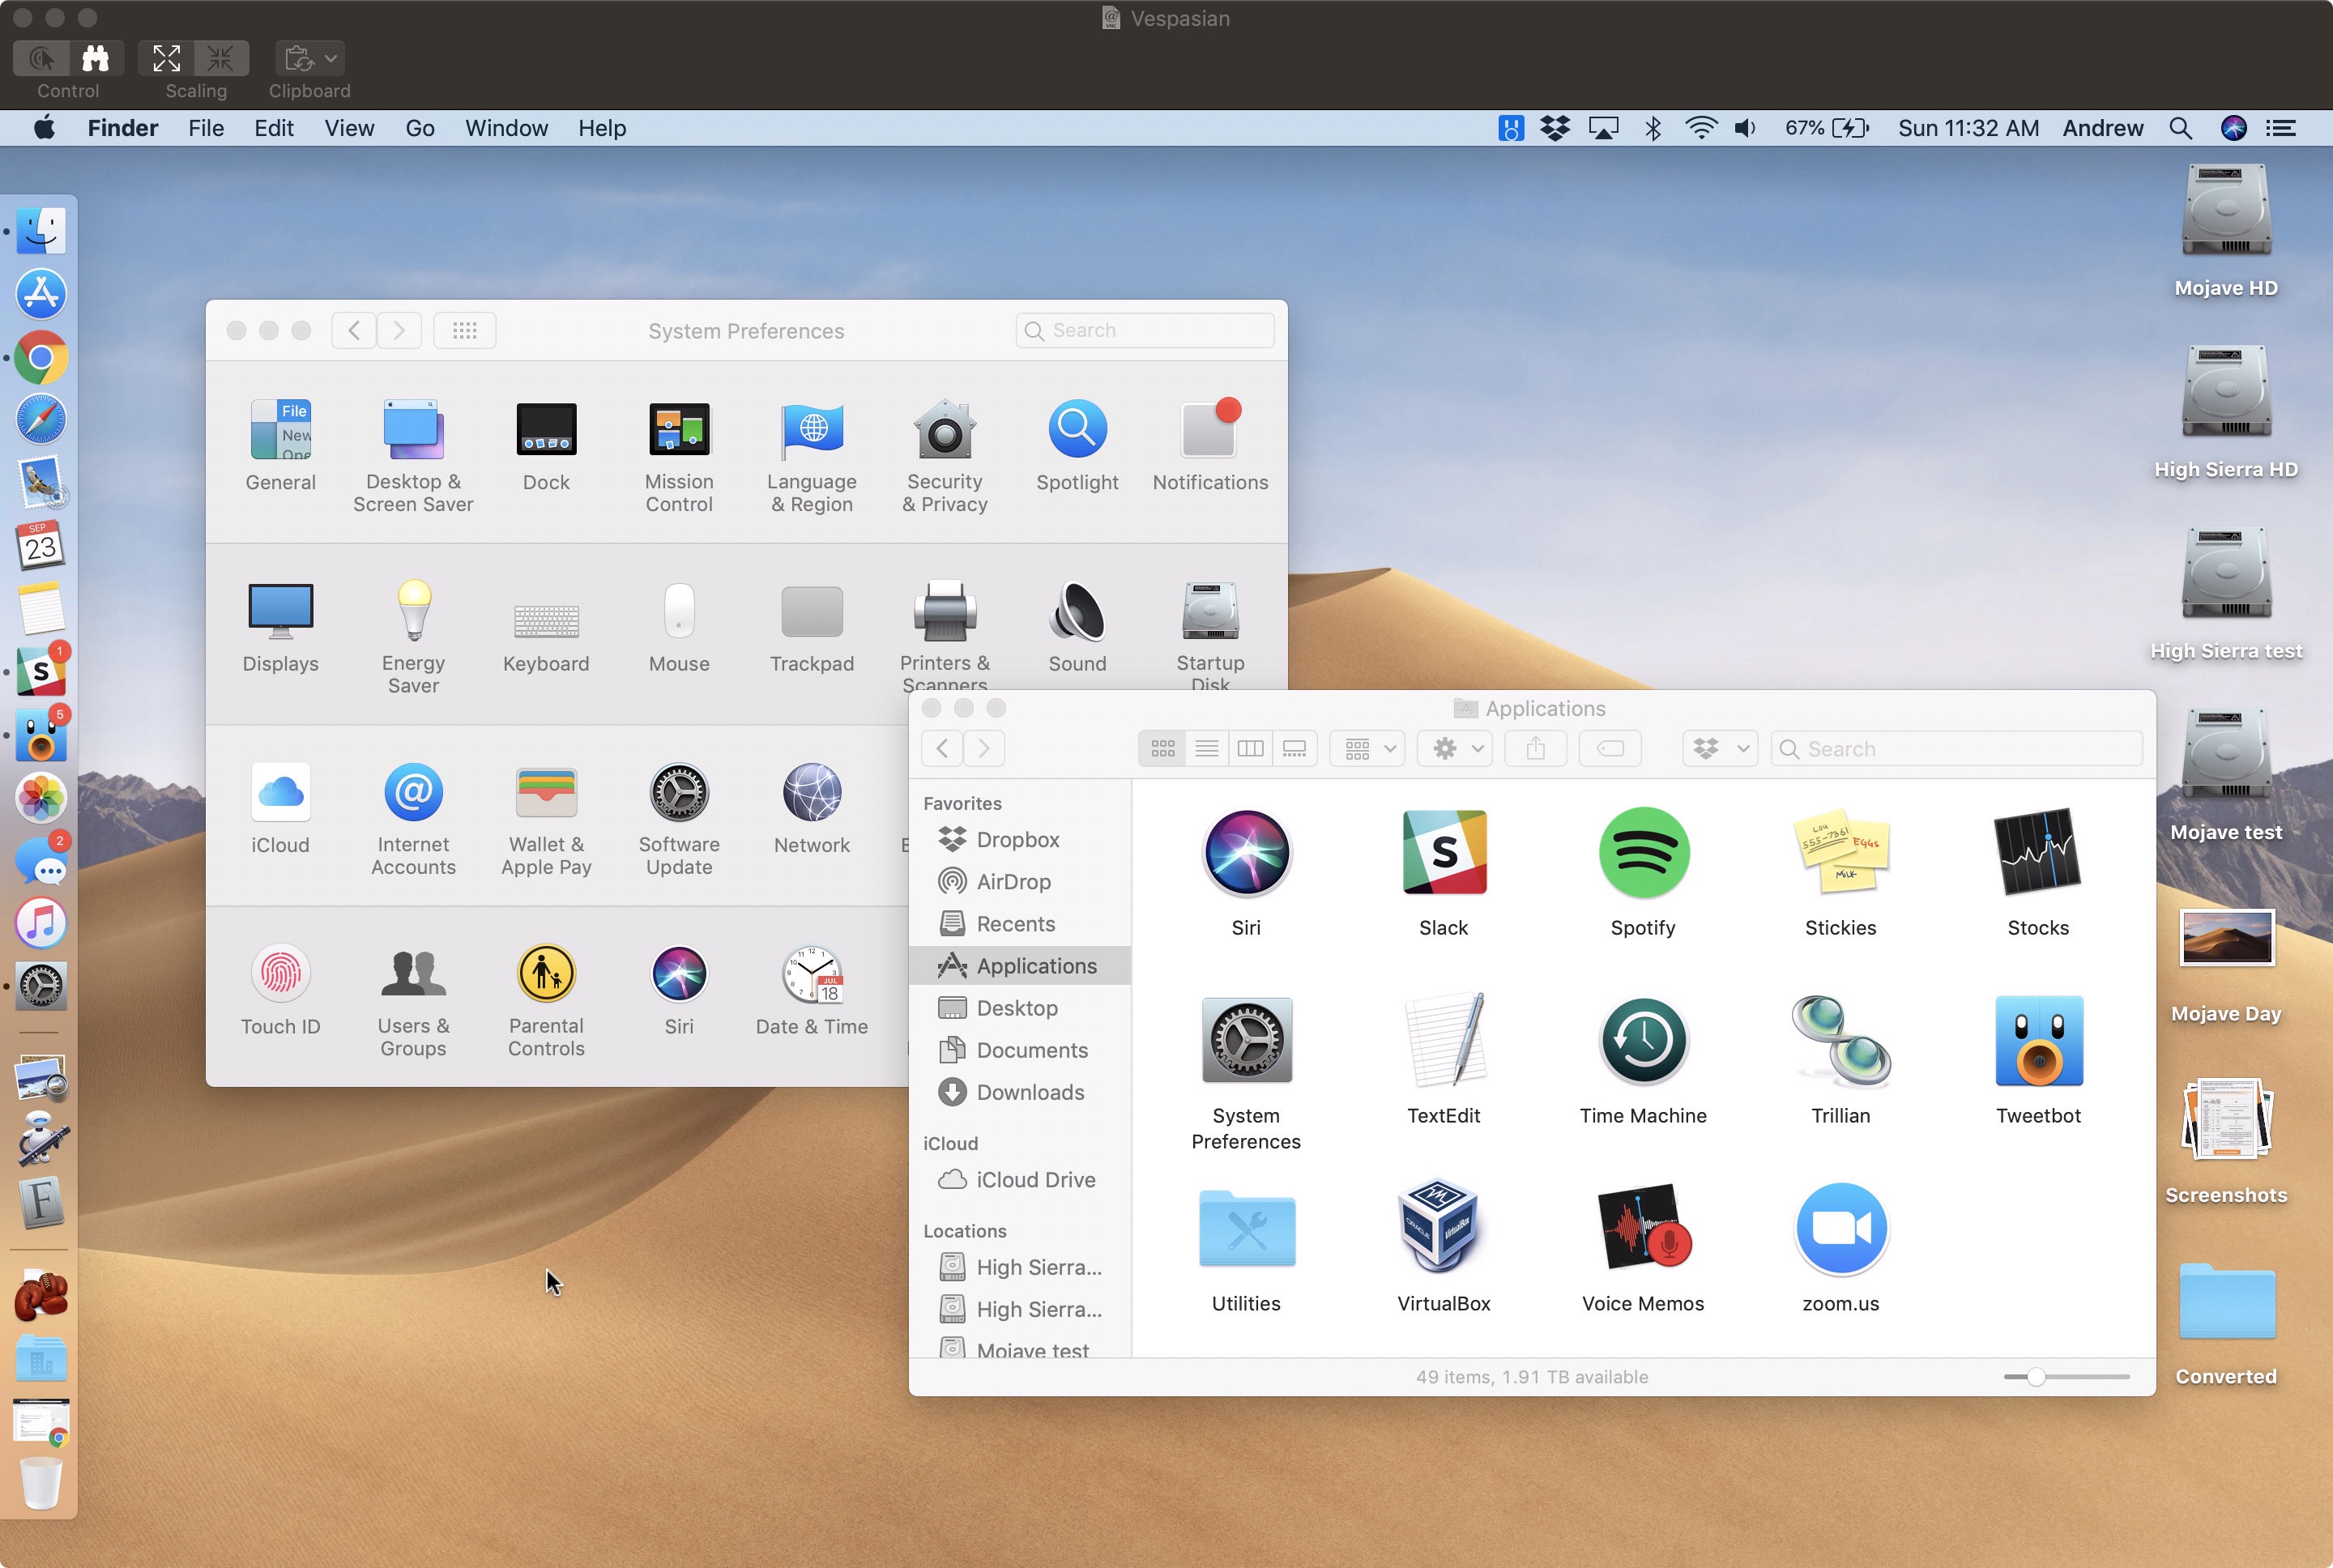 macOS 10.14 Mojave: The Ars Technica review.